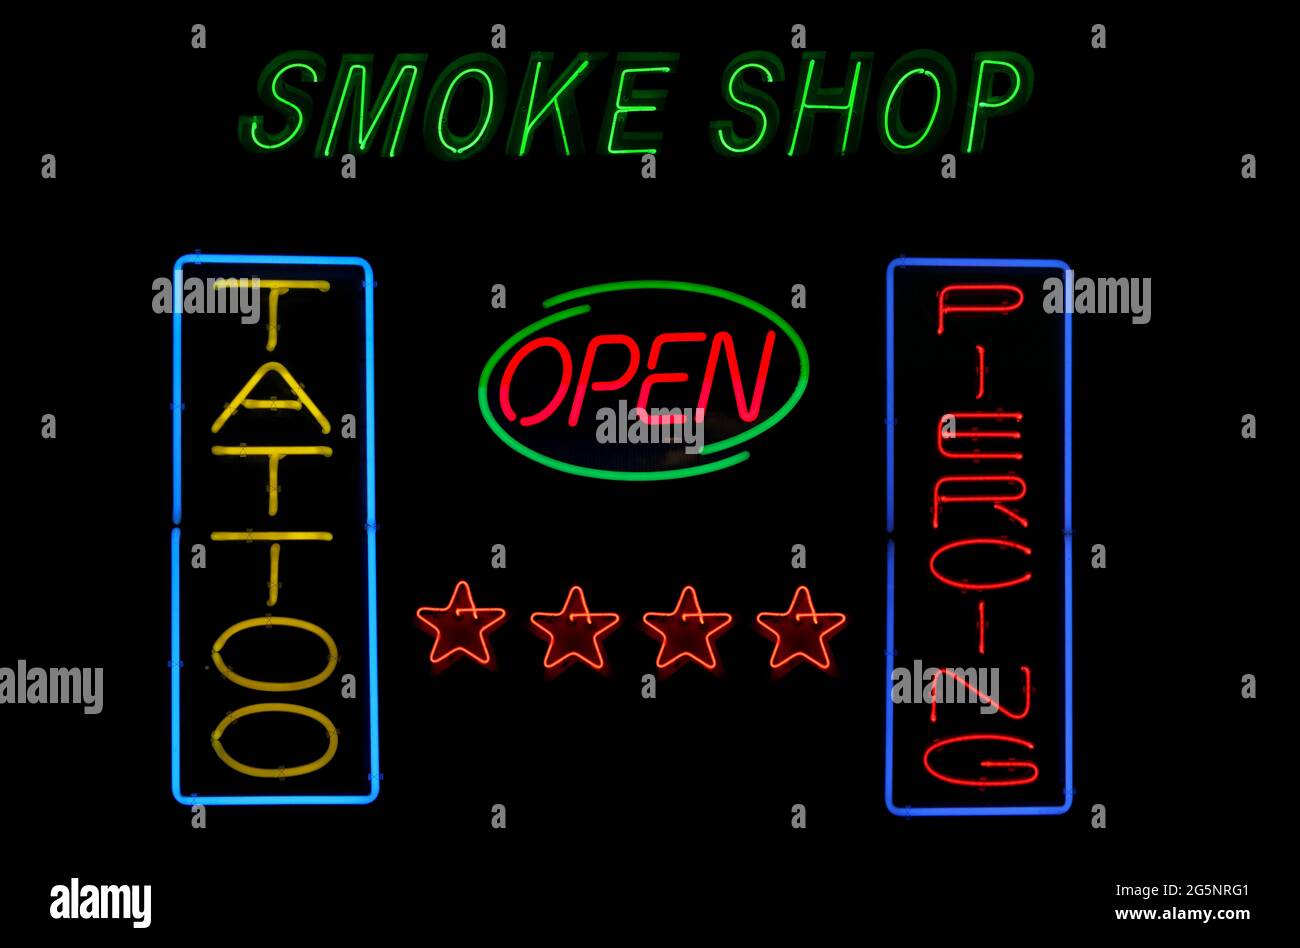 Vintage Neon Sign Tattoo, Piercing and Smoke Shop Stock Photo